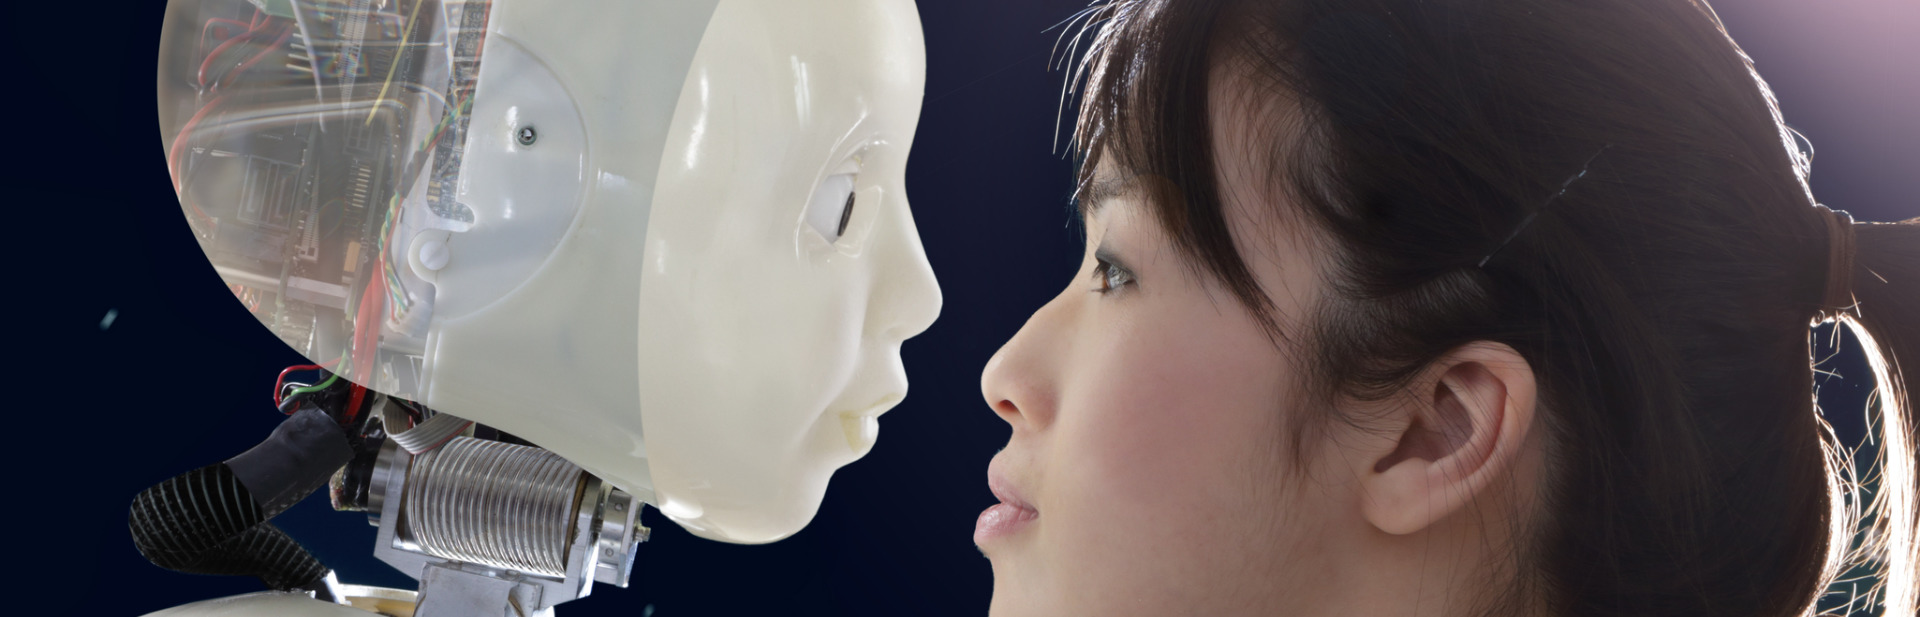 Woman and robot face to face